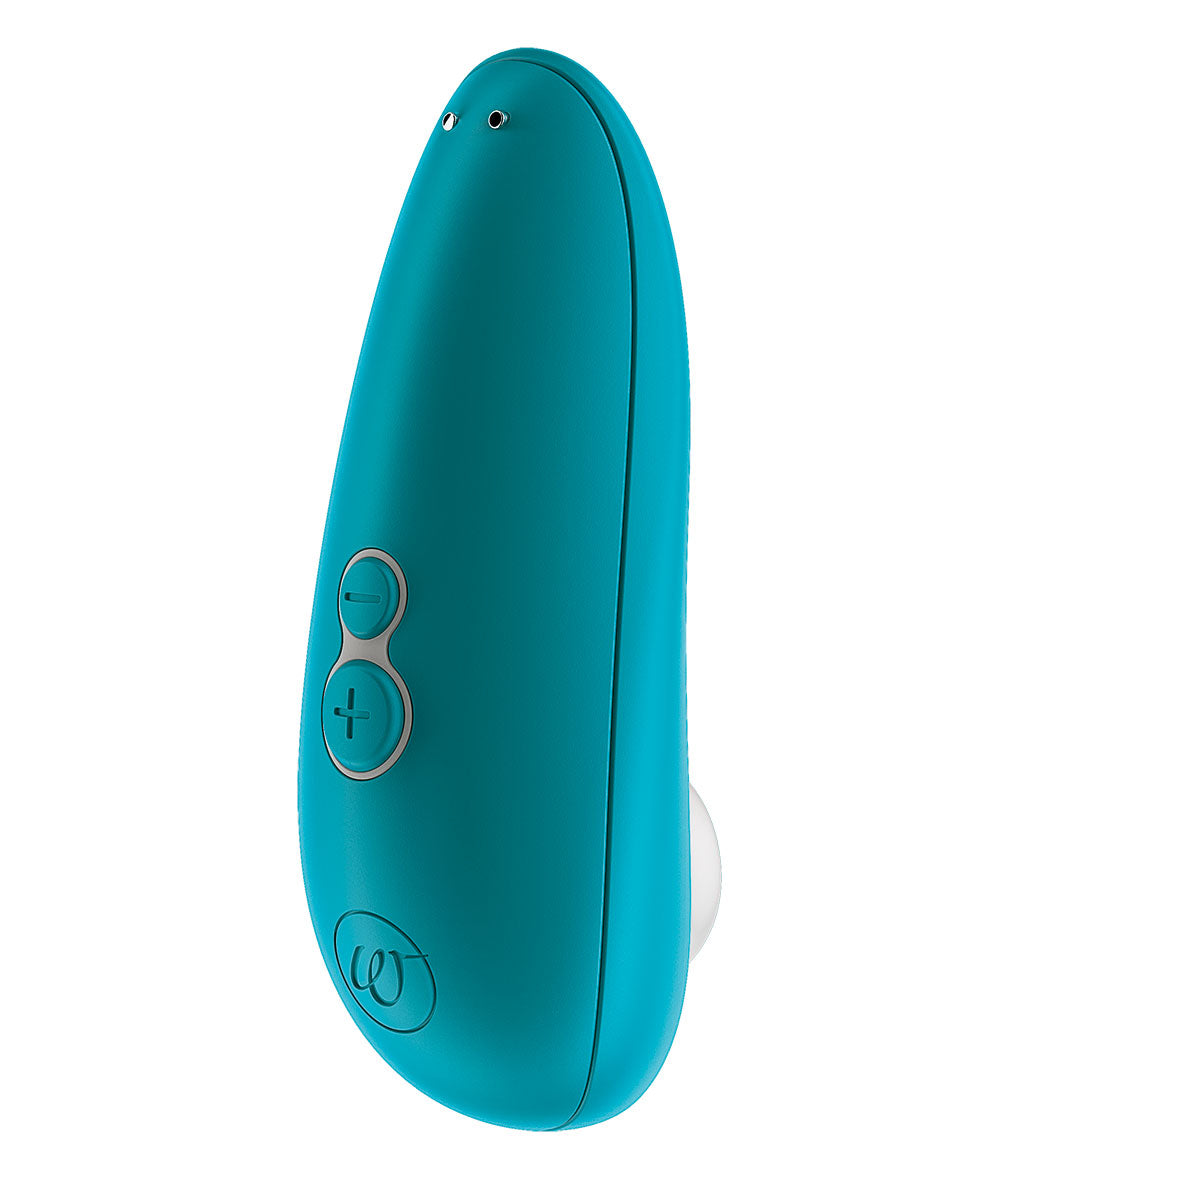 Womanizer Starlet 3 - Turquoise Intimates Adult Boutique